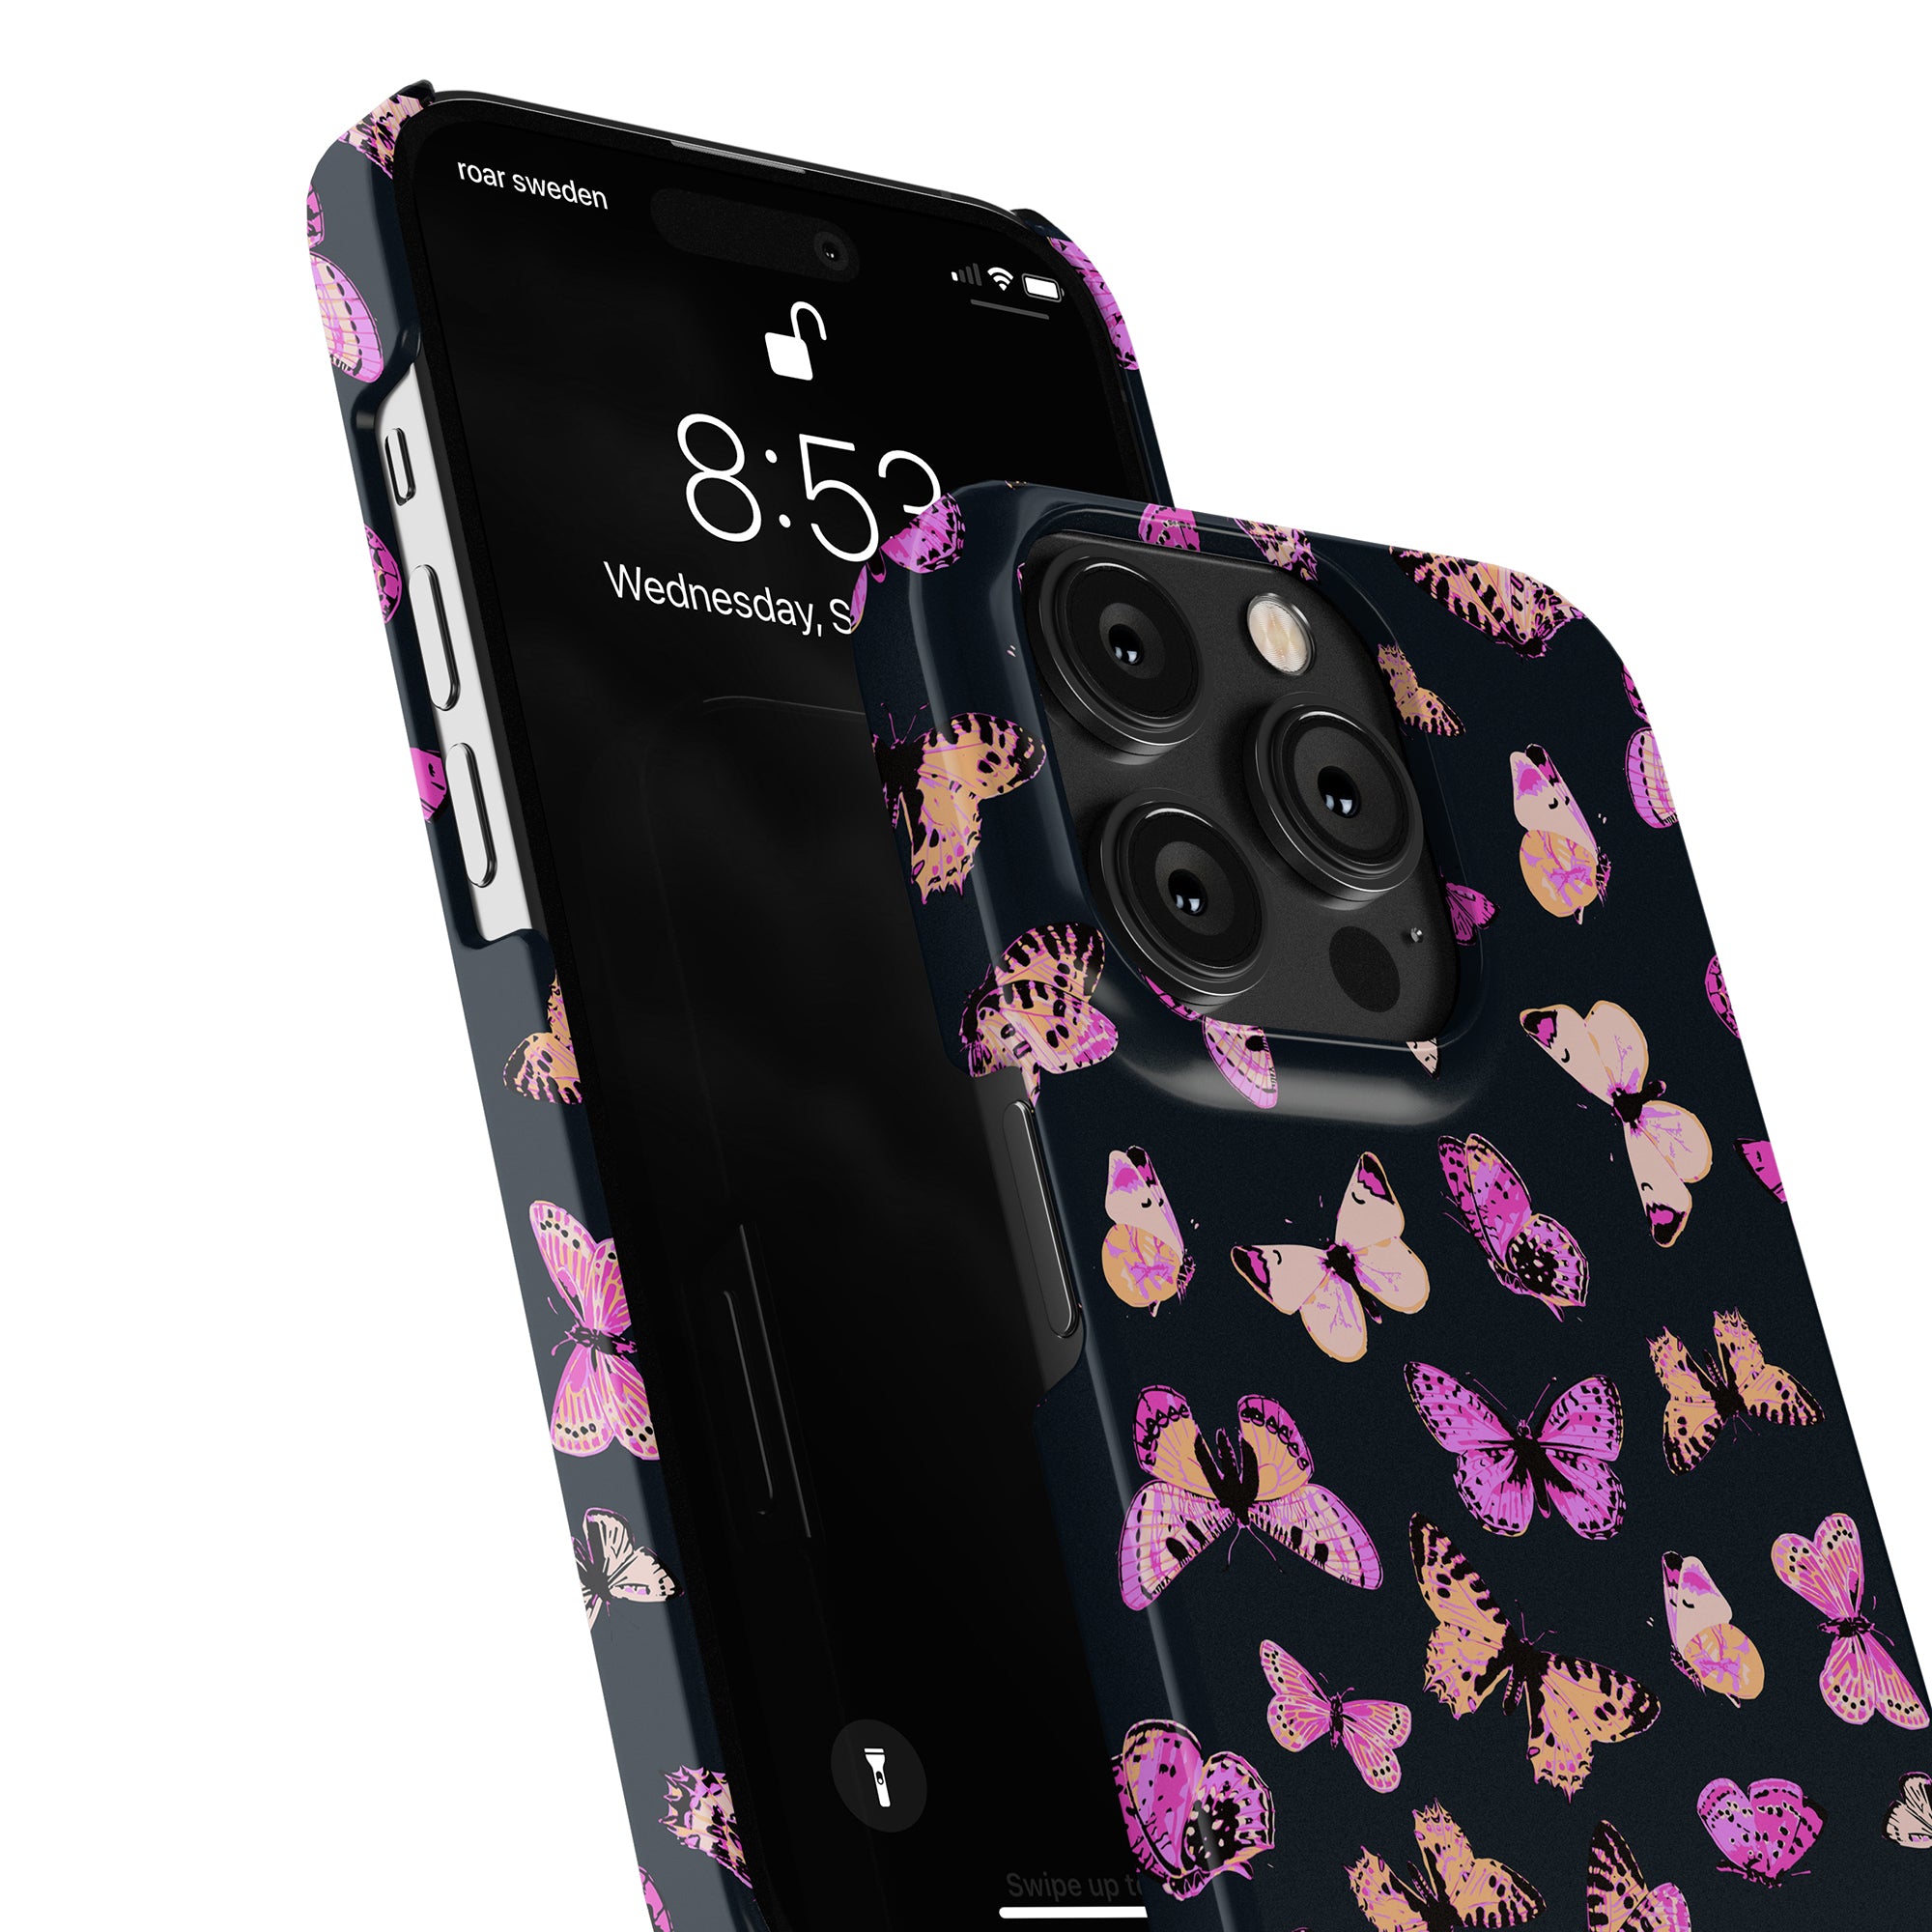 A smartphone with a Pink Butterflies - Slim case, displayed from two angles, alongside a relaxed fit, cotton shirt.